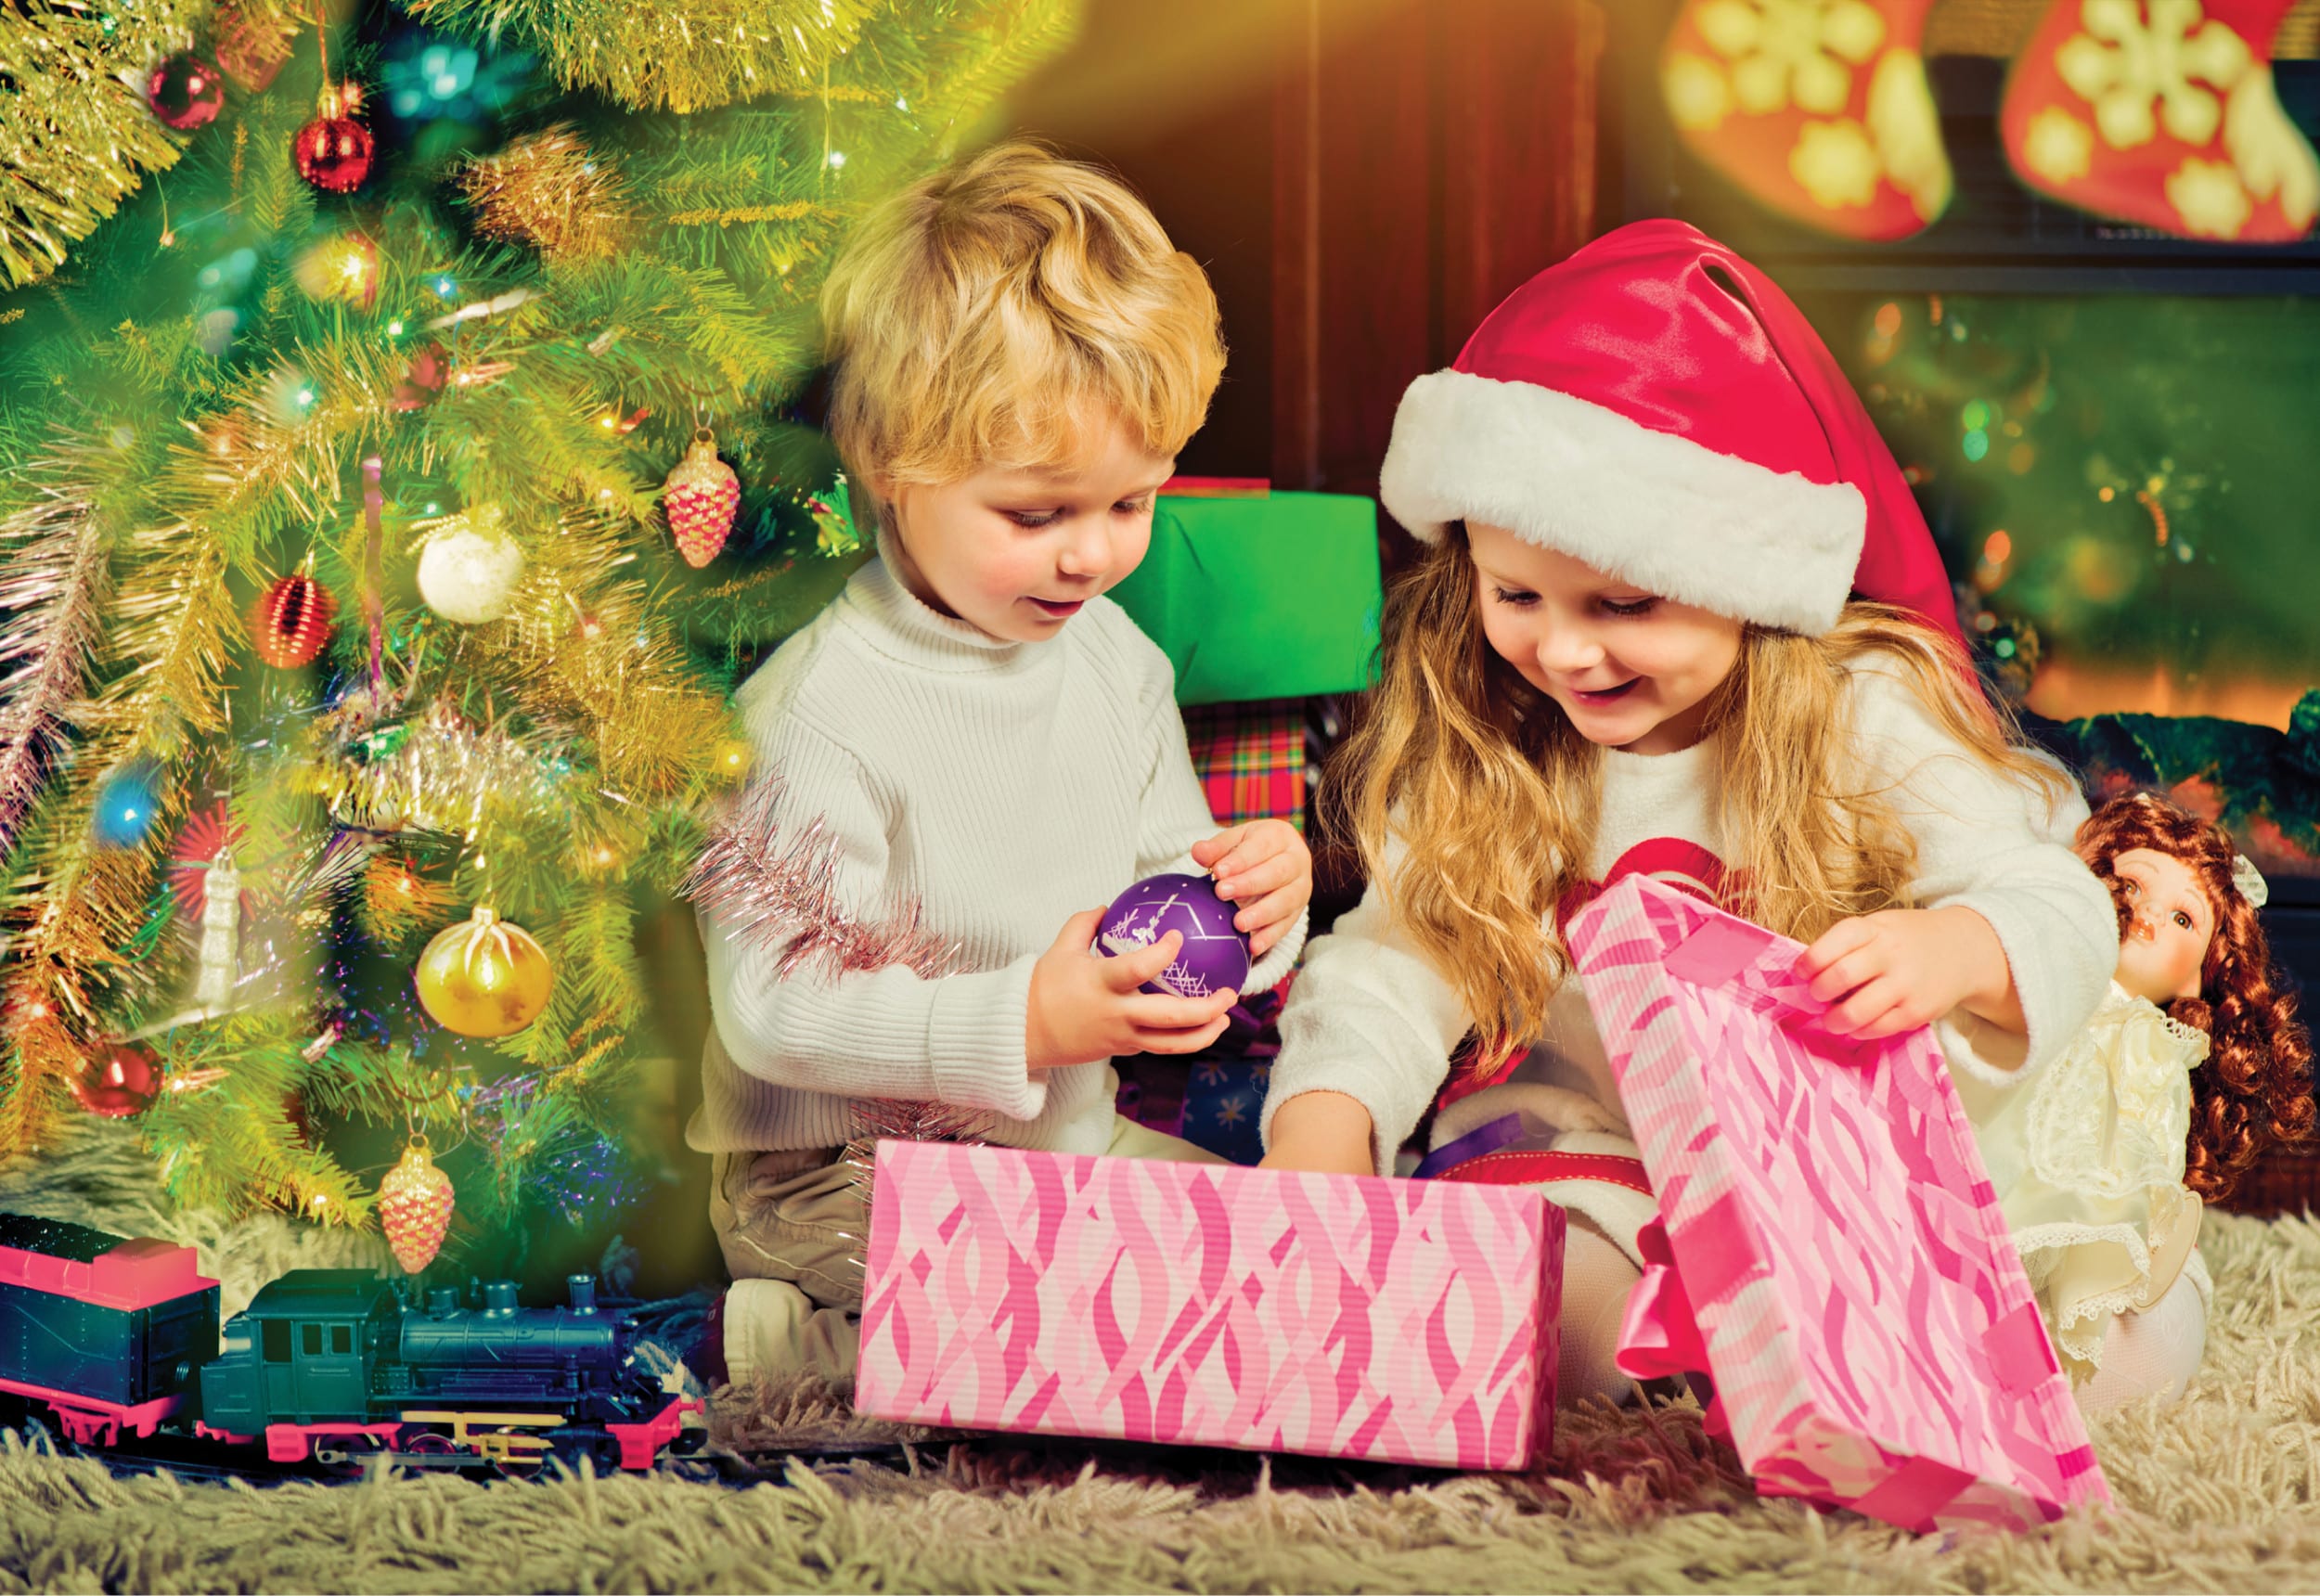 Feel good about buying toys this Christmas with parentdirect.com.au ...